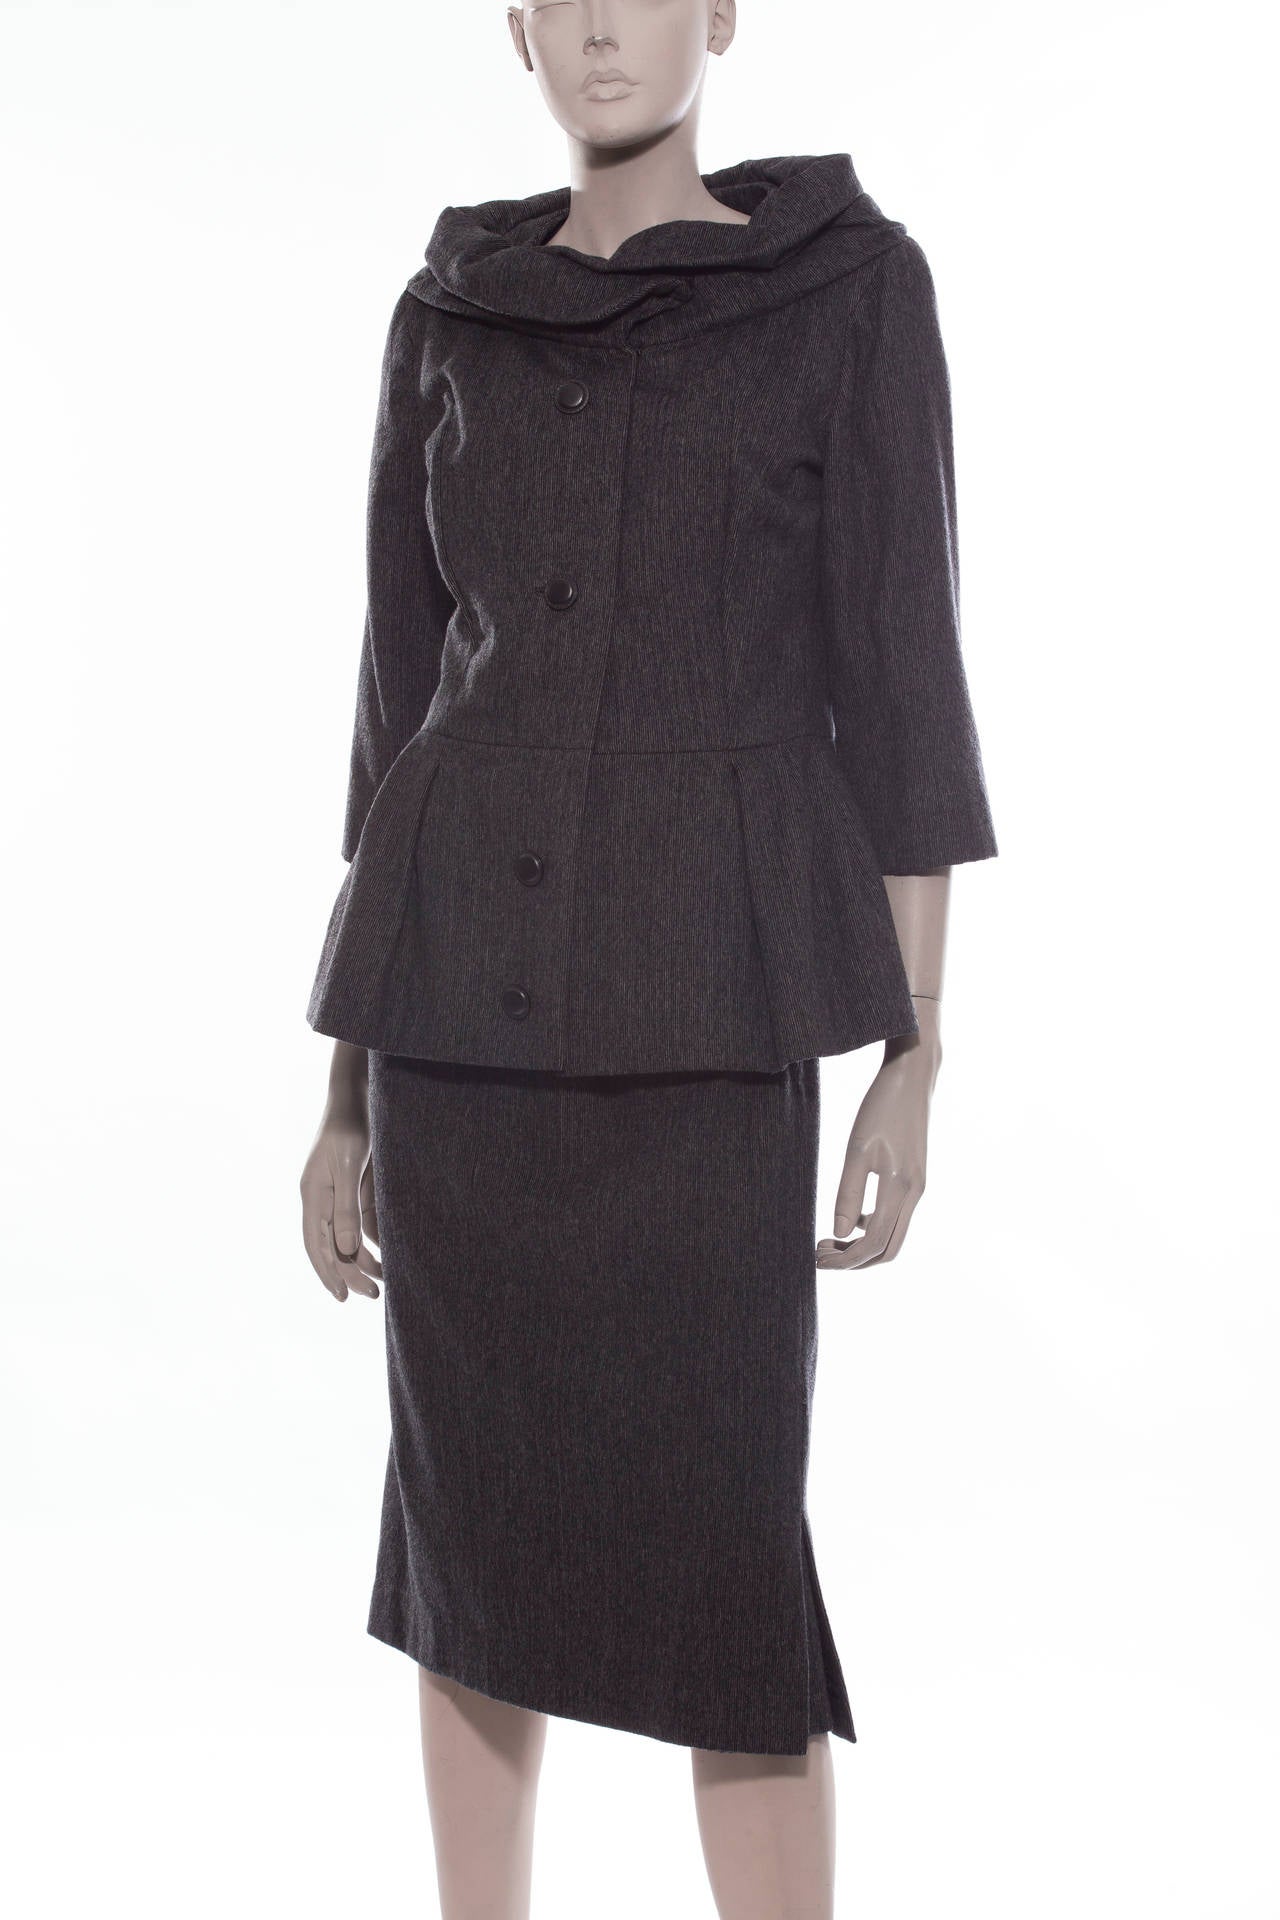 Christian Dior, circa 1960s charcoal grey wool skirt suit.Jacket is fully lined with four buttons,3/4 length sleeves,shawl collar and peplum. Skirt has side zipper,two kick pleats and fully lined.